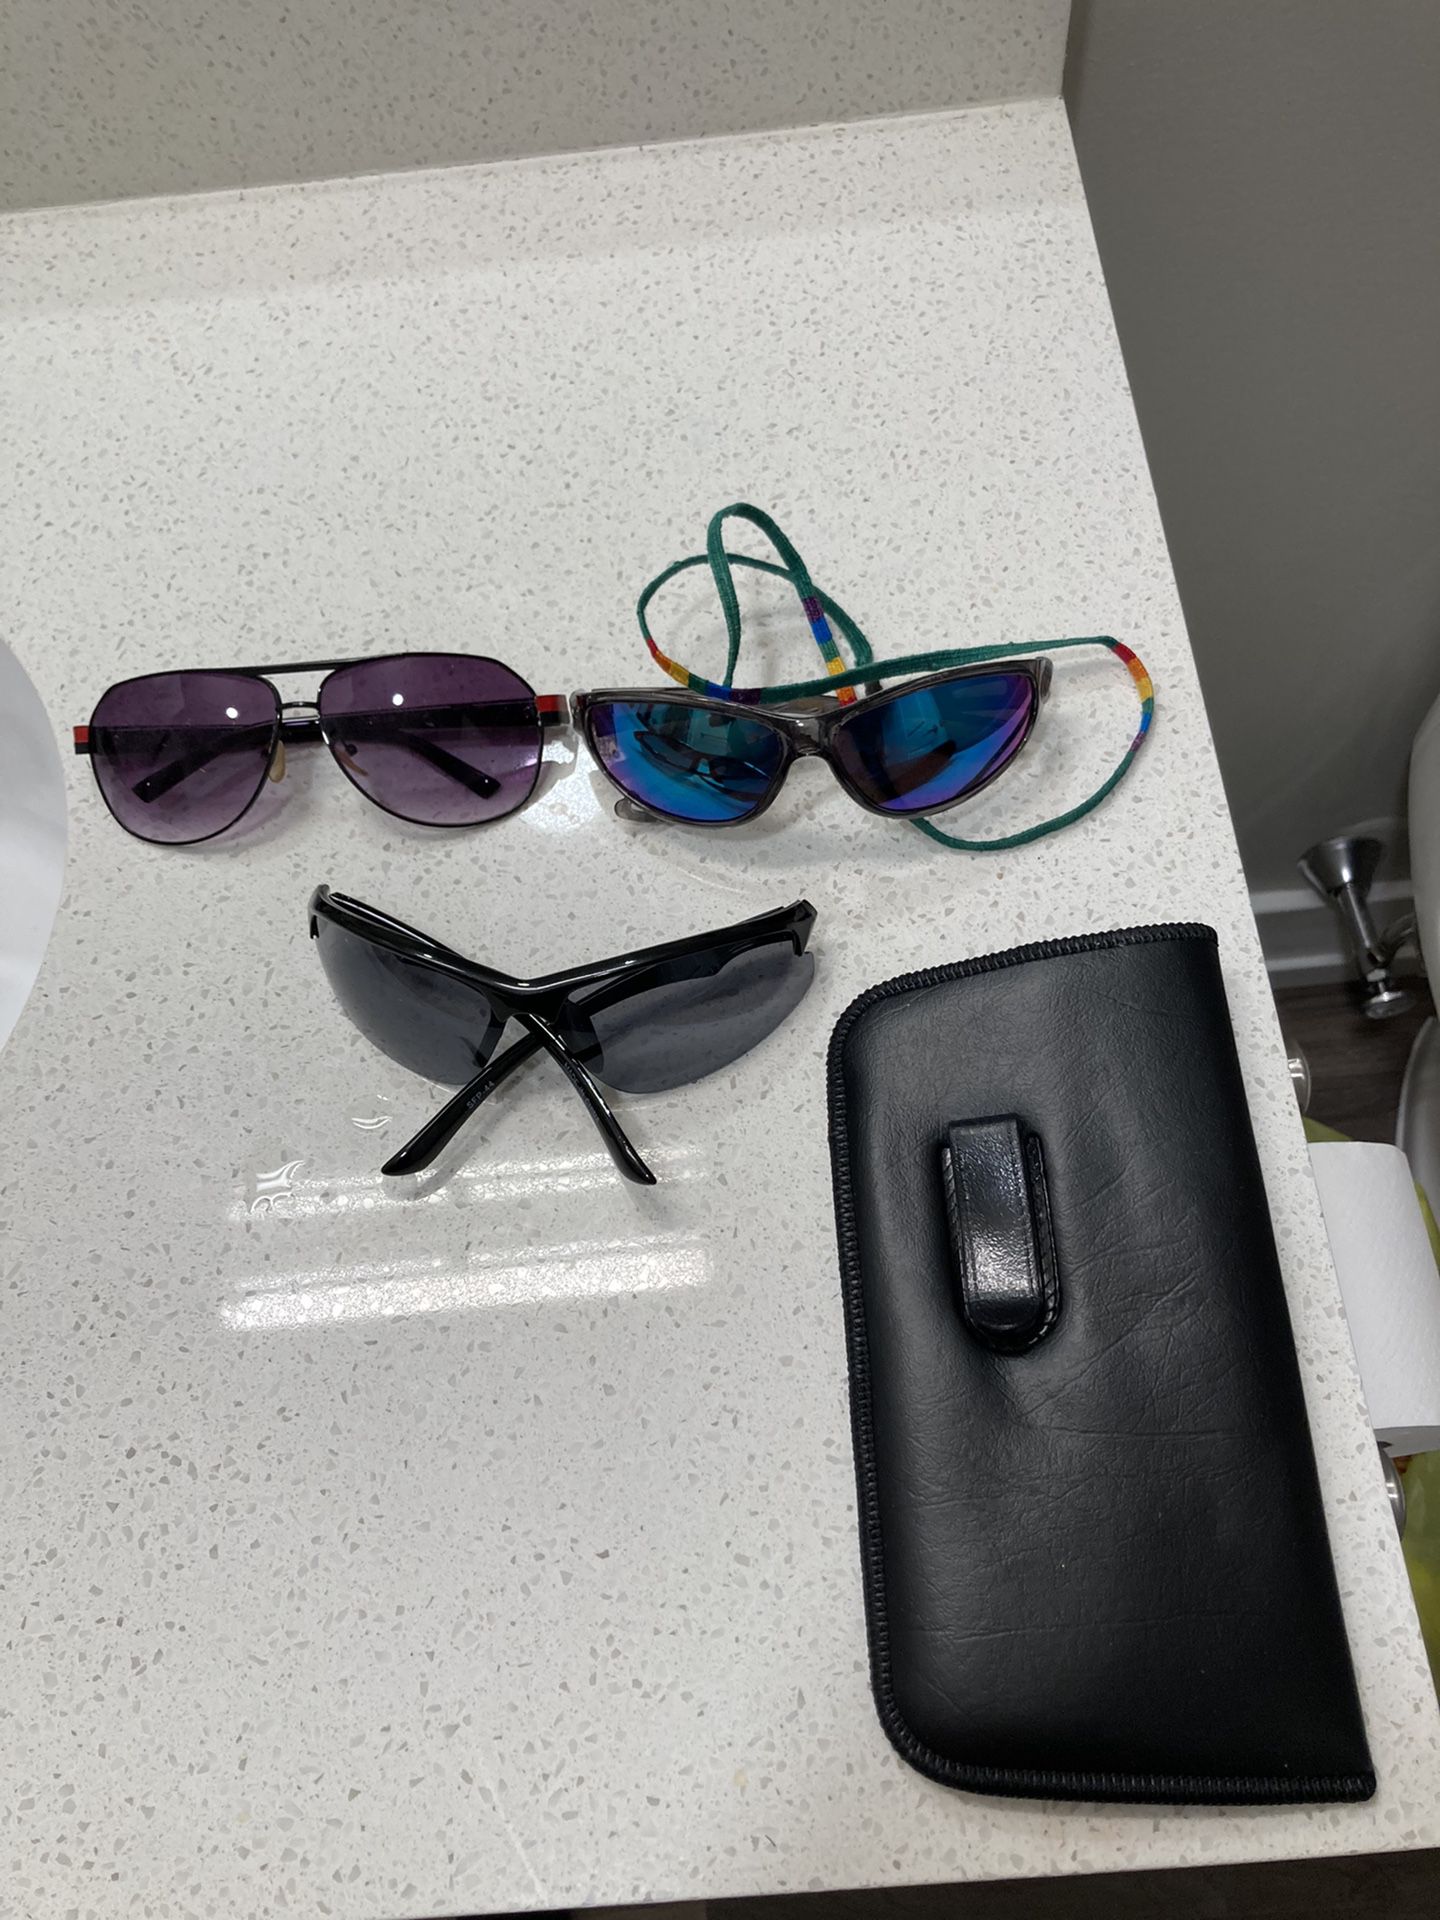 Men sunglasses and leather case